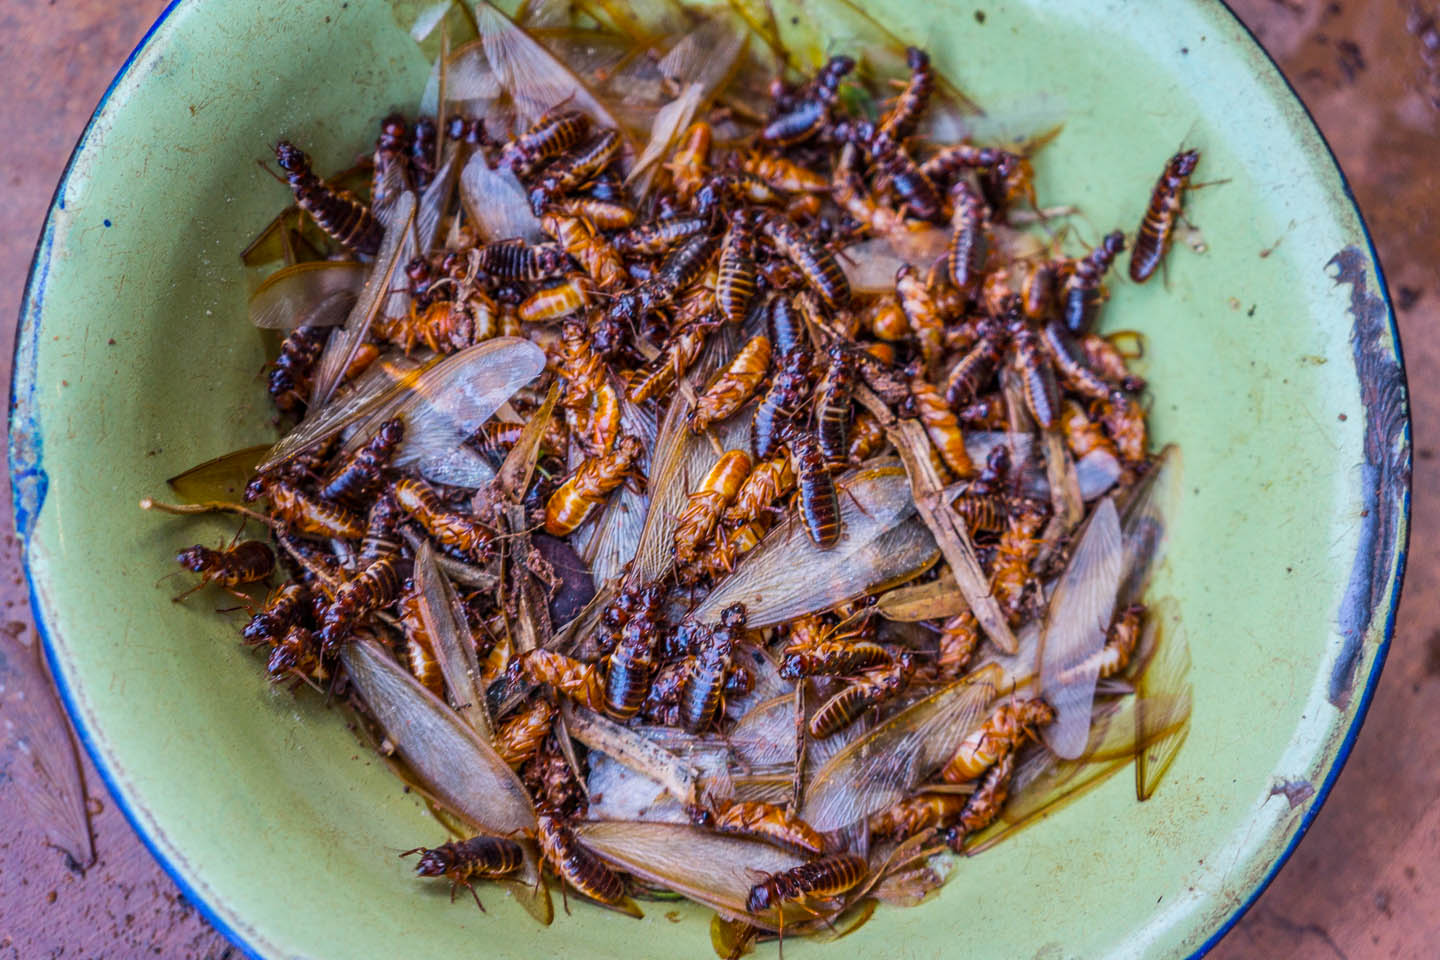 A plate of mixed cooked insects